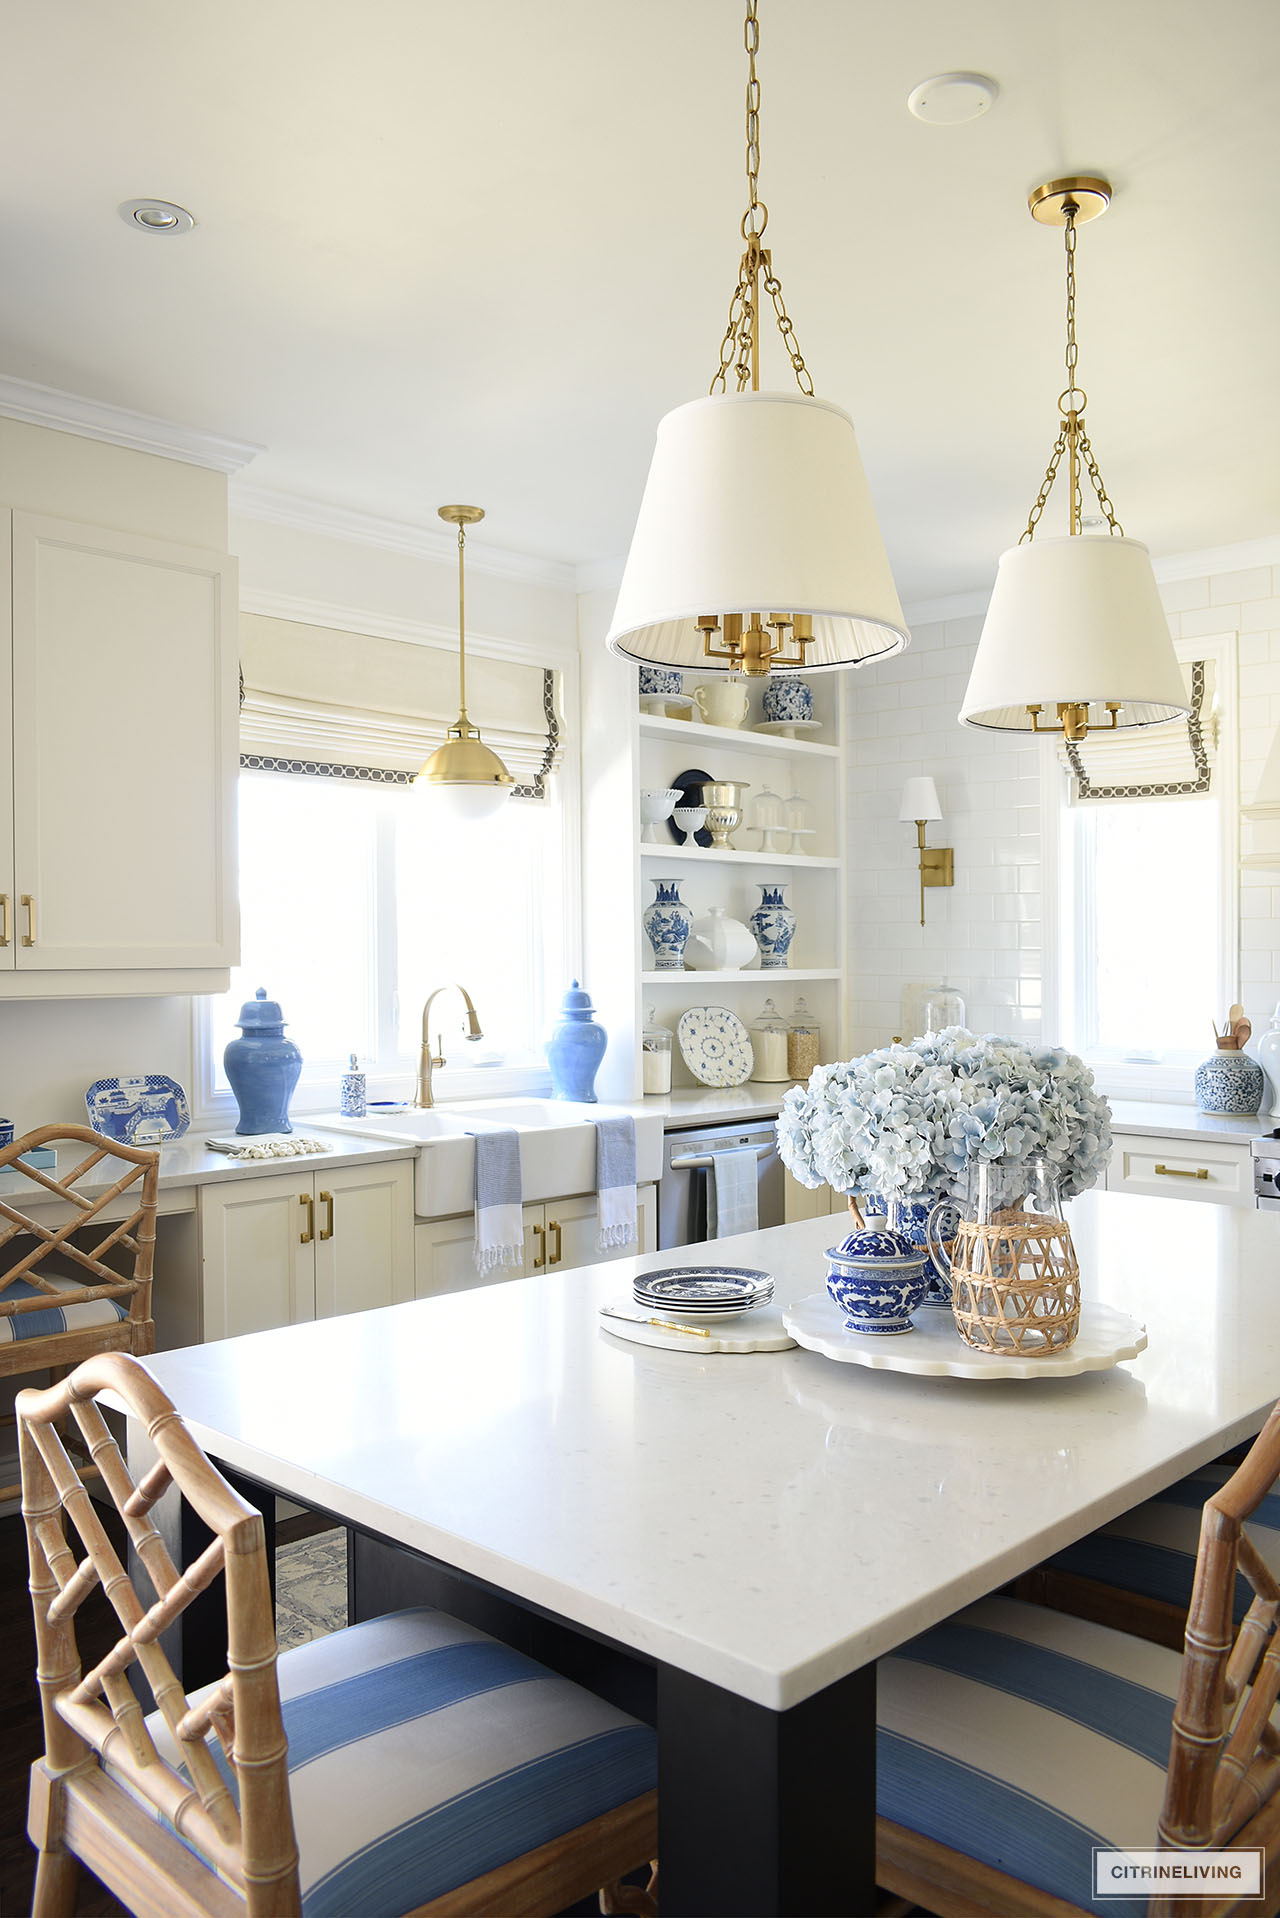 White kitchen decorated for spring with blue and white decor, ginger jars, pretty tea towels and woven accents.